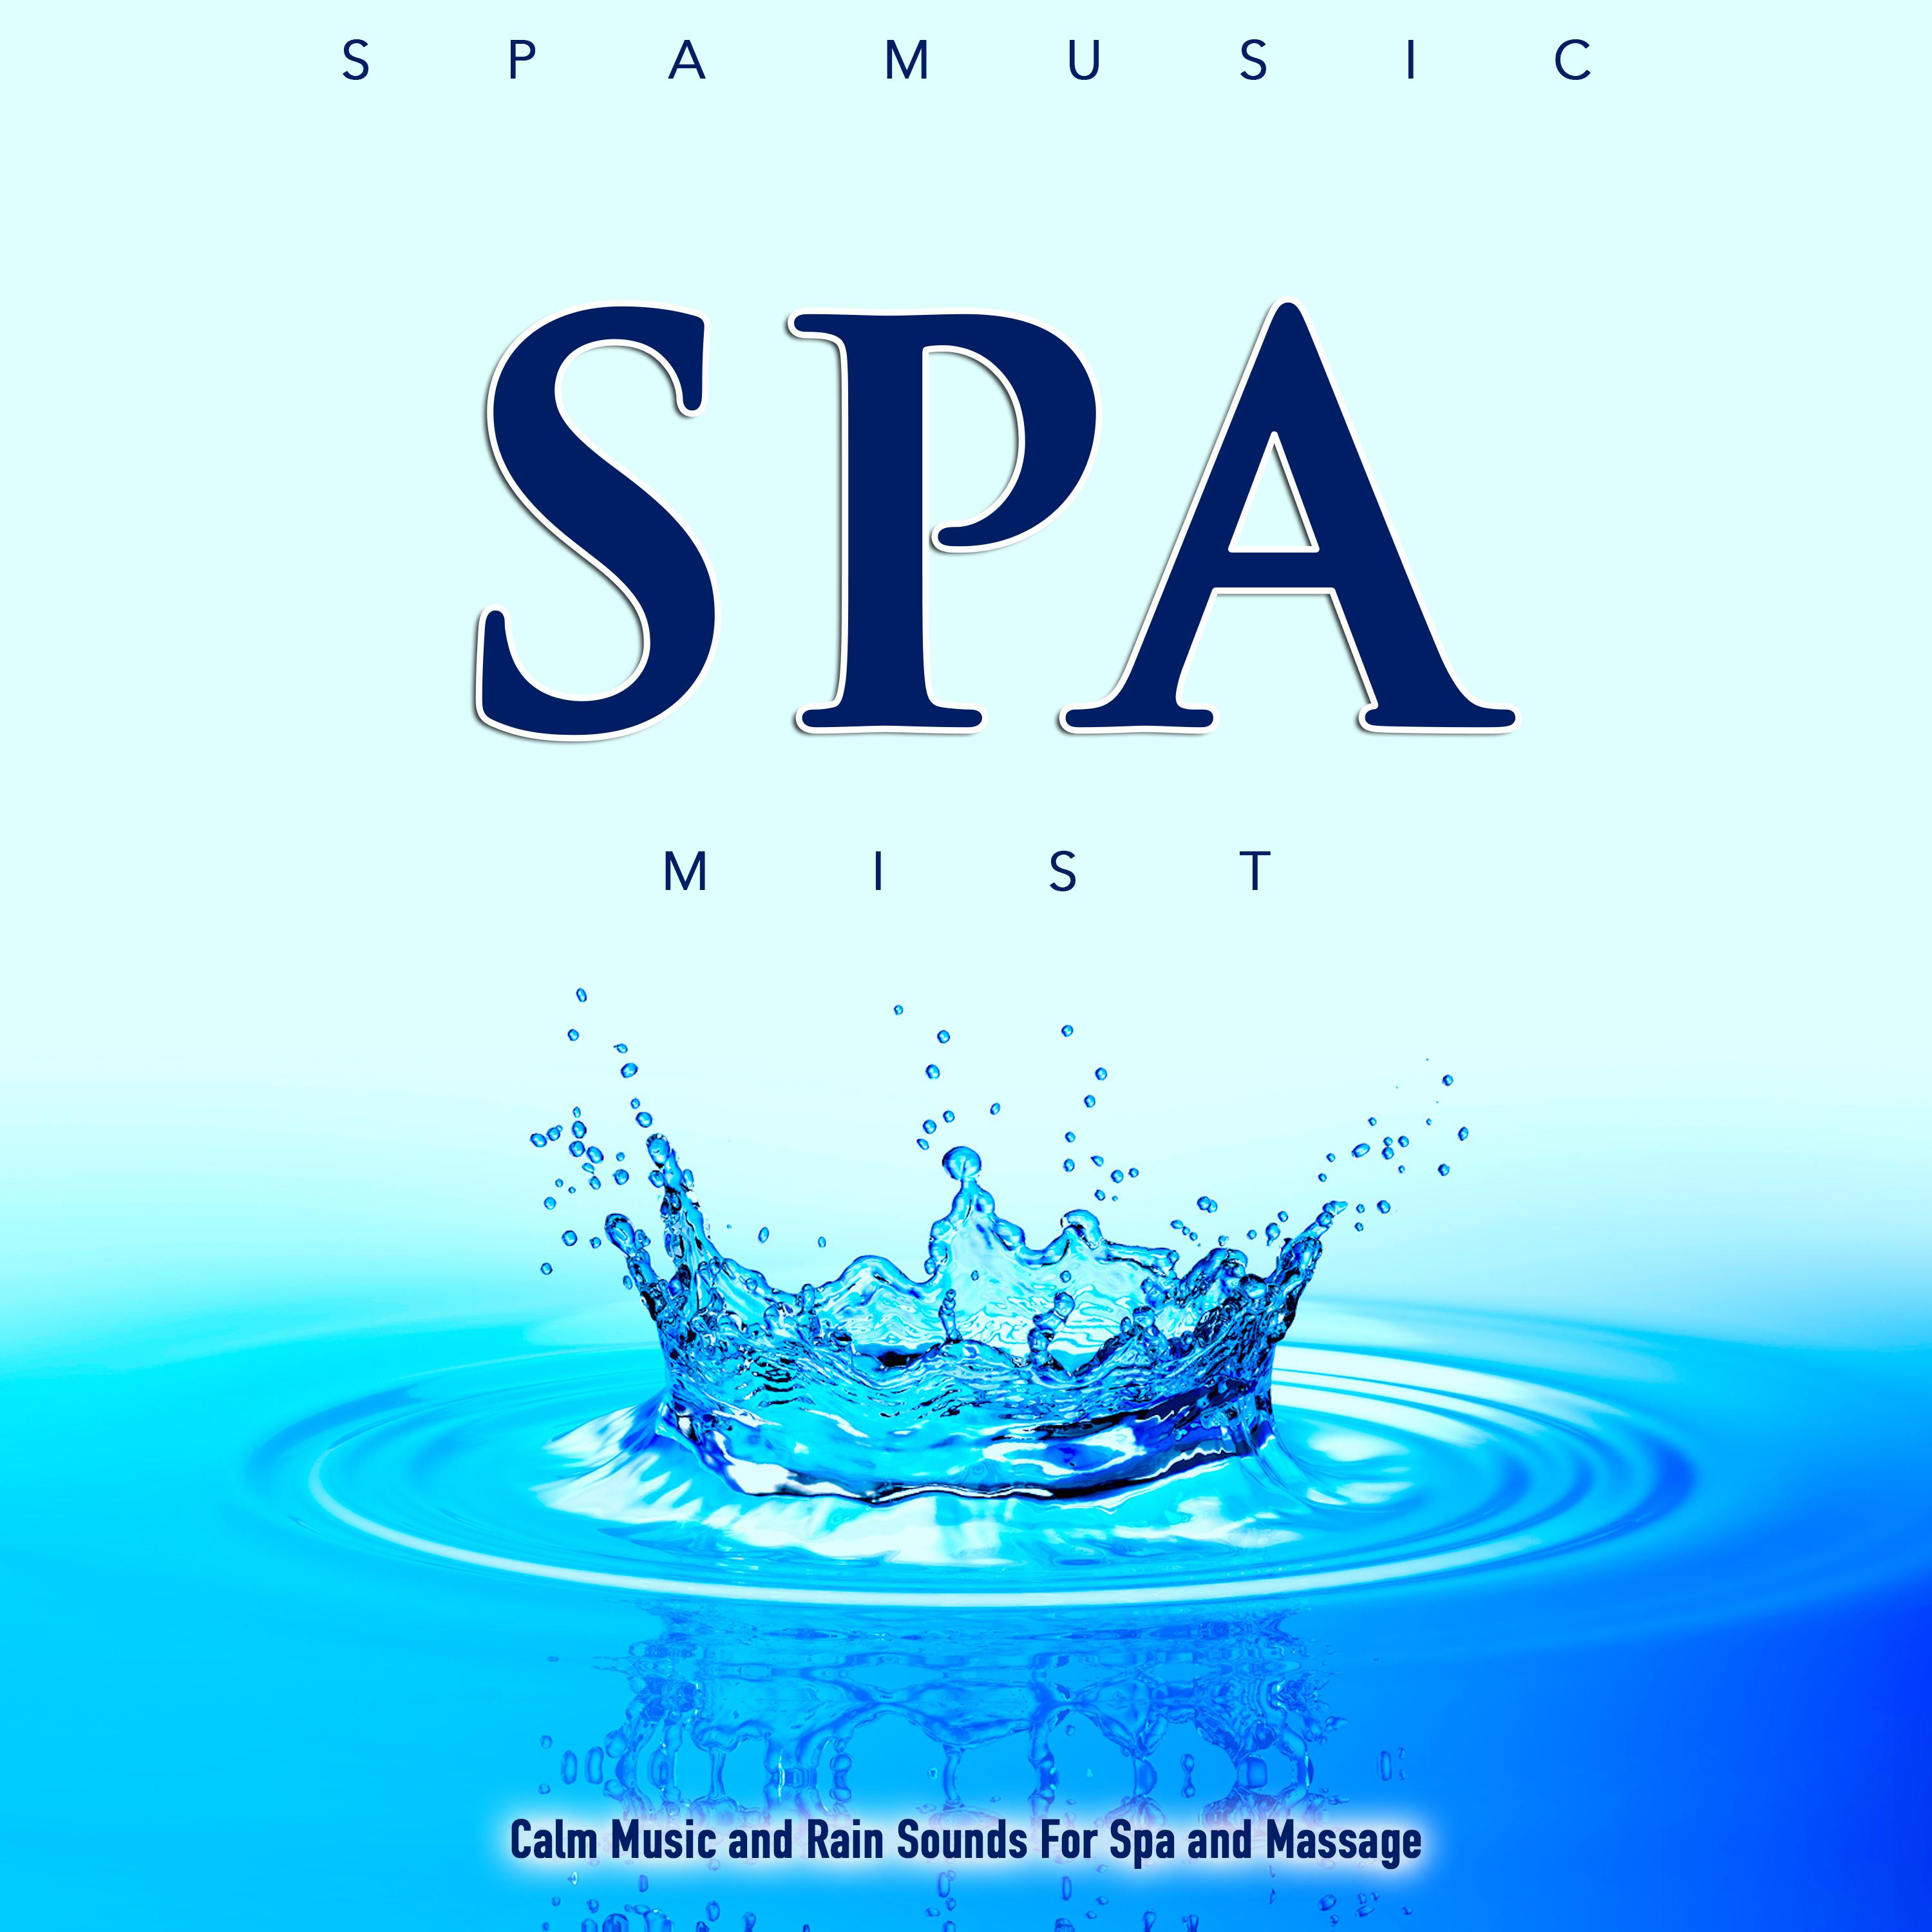 Spa Mist: Calm Music and Rain Sounds For Spa and Massage